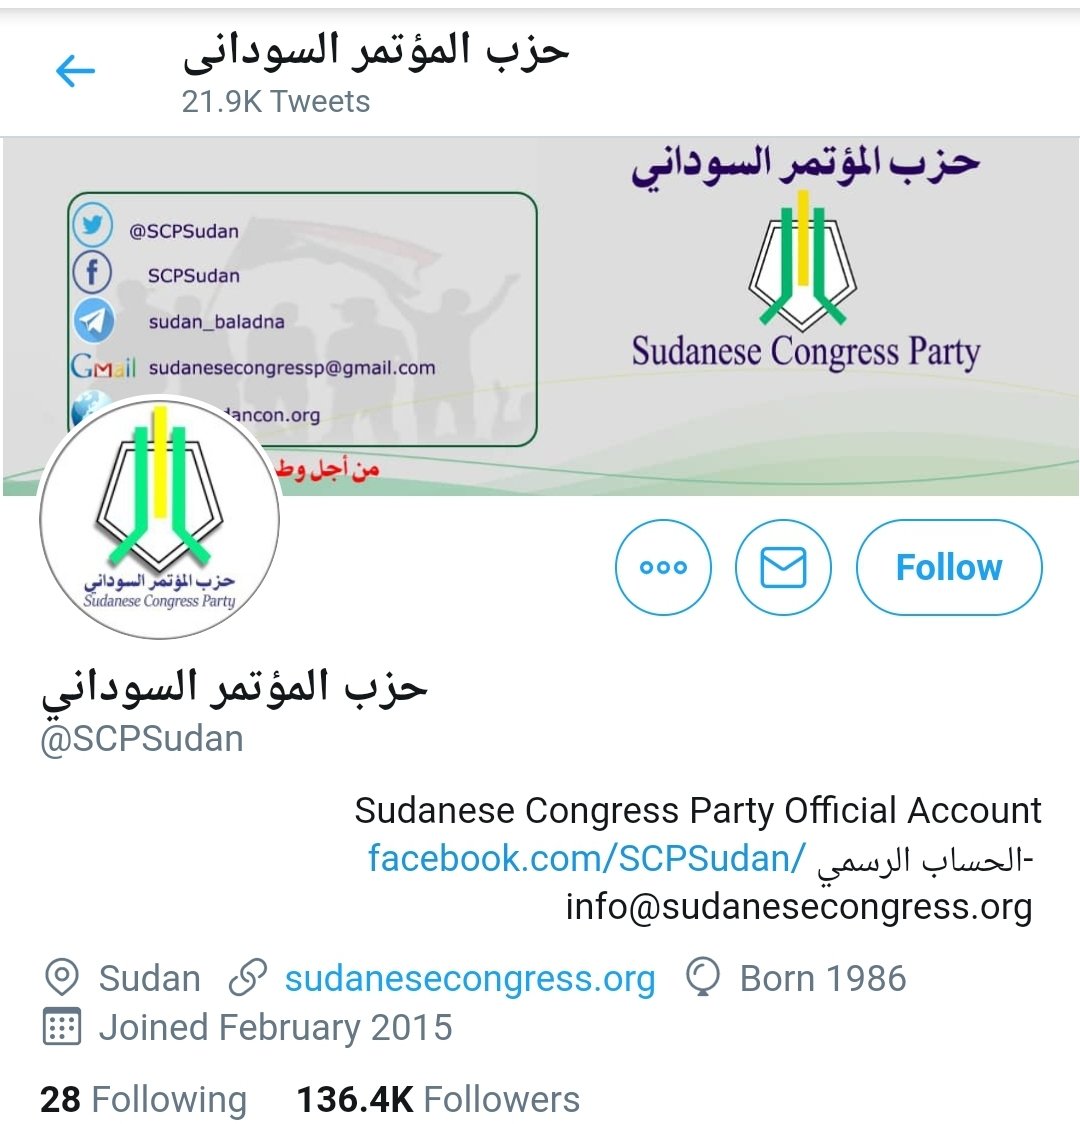  @SCPSudan The Sudanese Congress Party